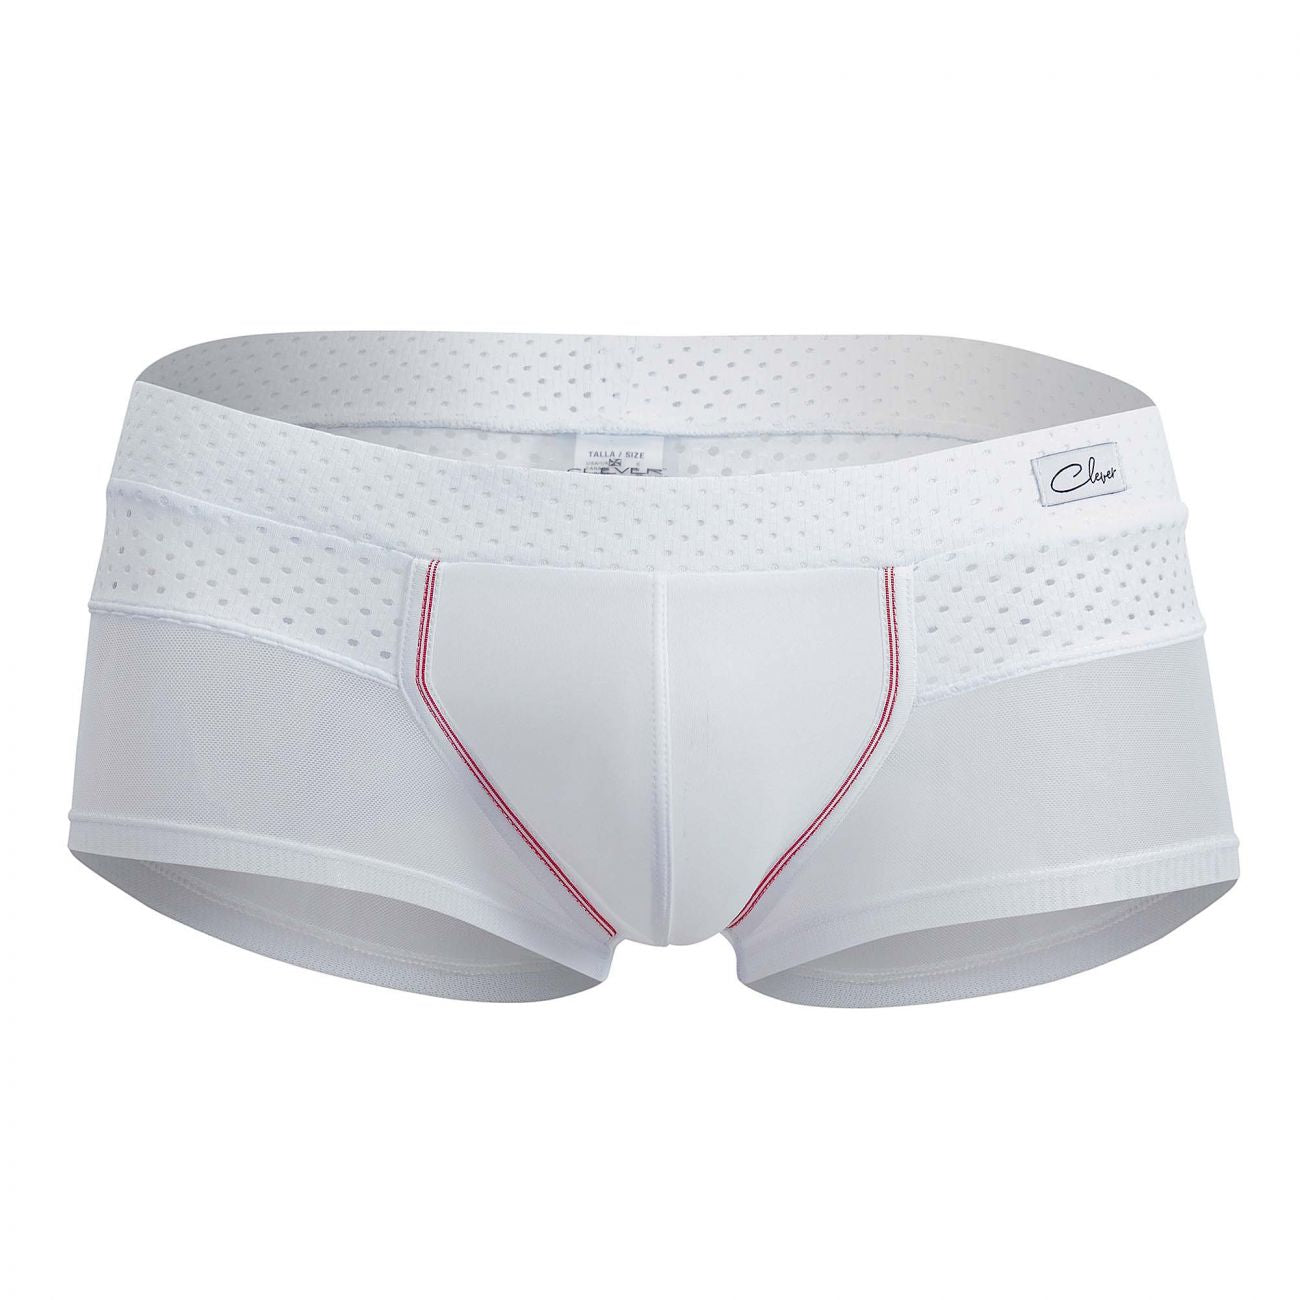 Clever 0262 Control Latin Trunks White